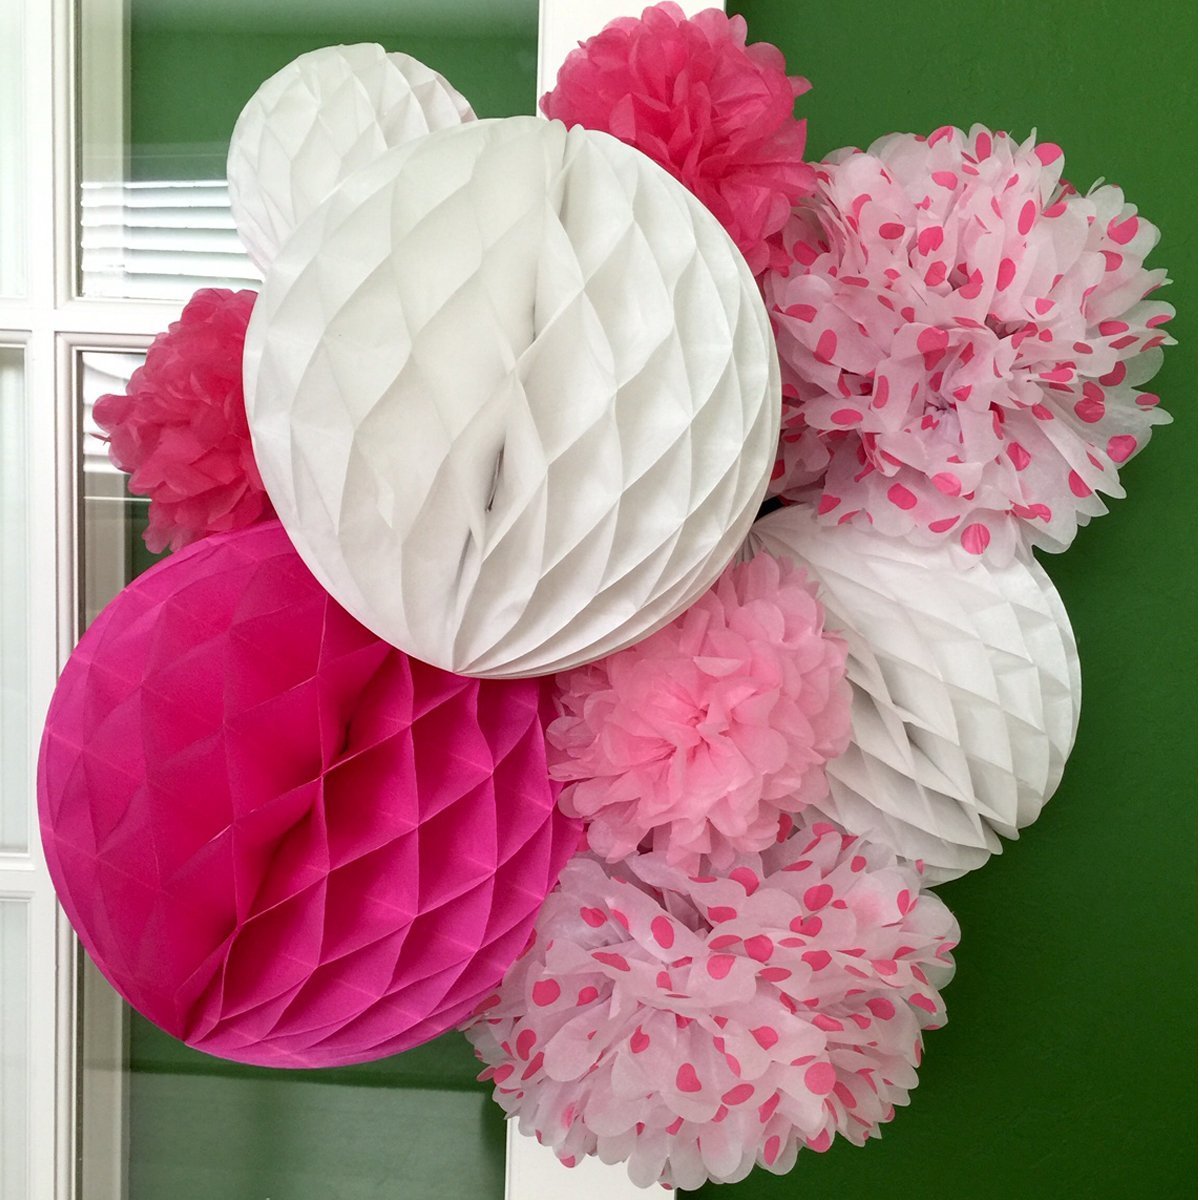 Wrapables Set of 21 Tissue Honeycomb Ball and Pom Pom Party Decorations for Weddings, Birthday Parties Baby Showers and Nursery Decor, Pink/Hot Pink